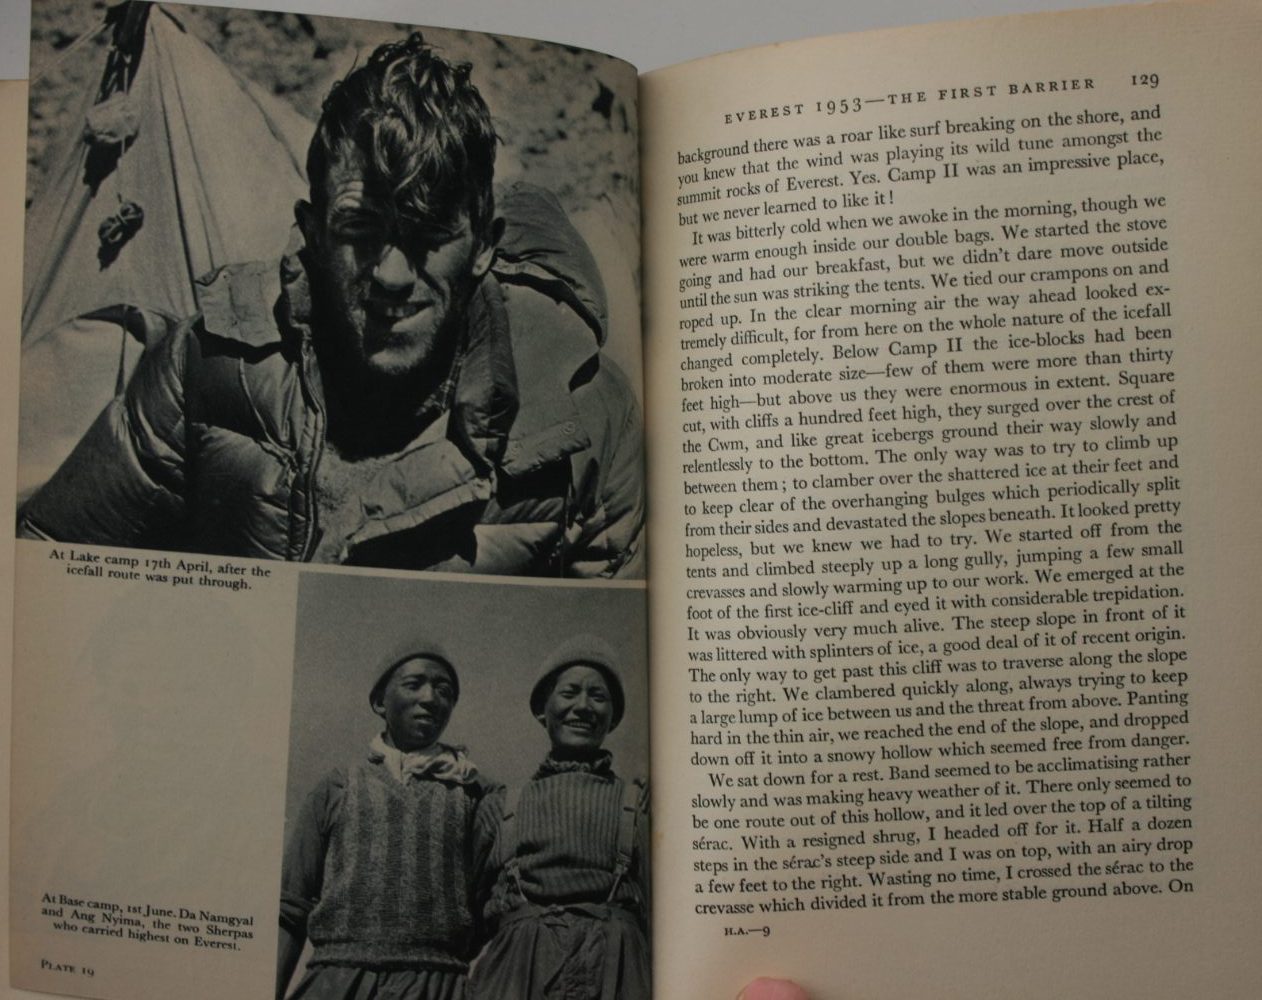 High Adventure by Sir Edmund Hillary. FIRST EDITION, first printing. SIGNED E P HILLARY